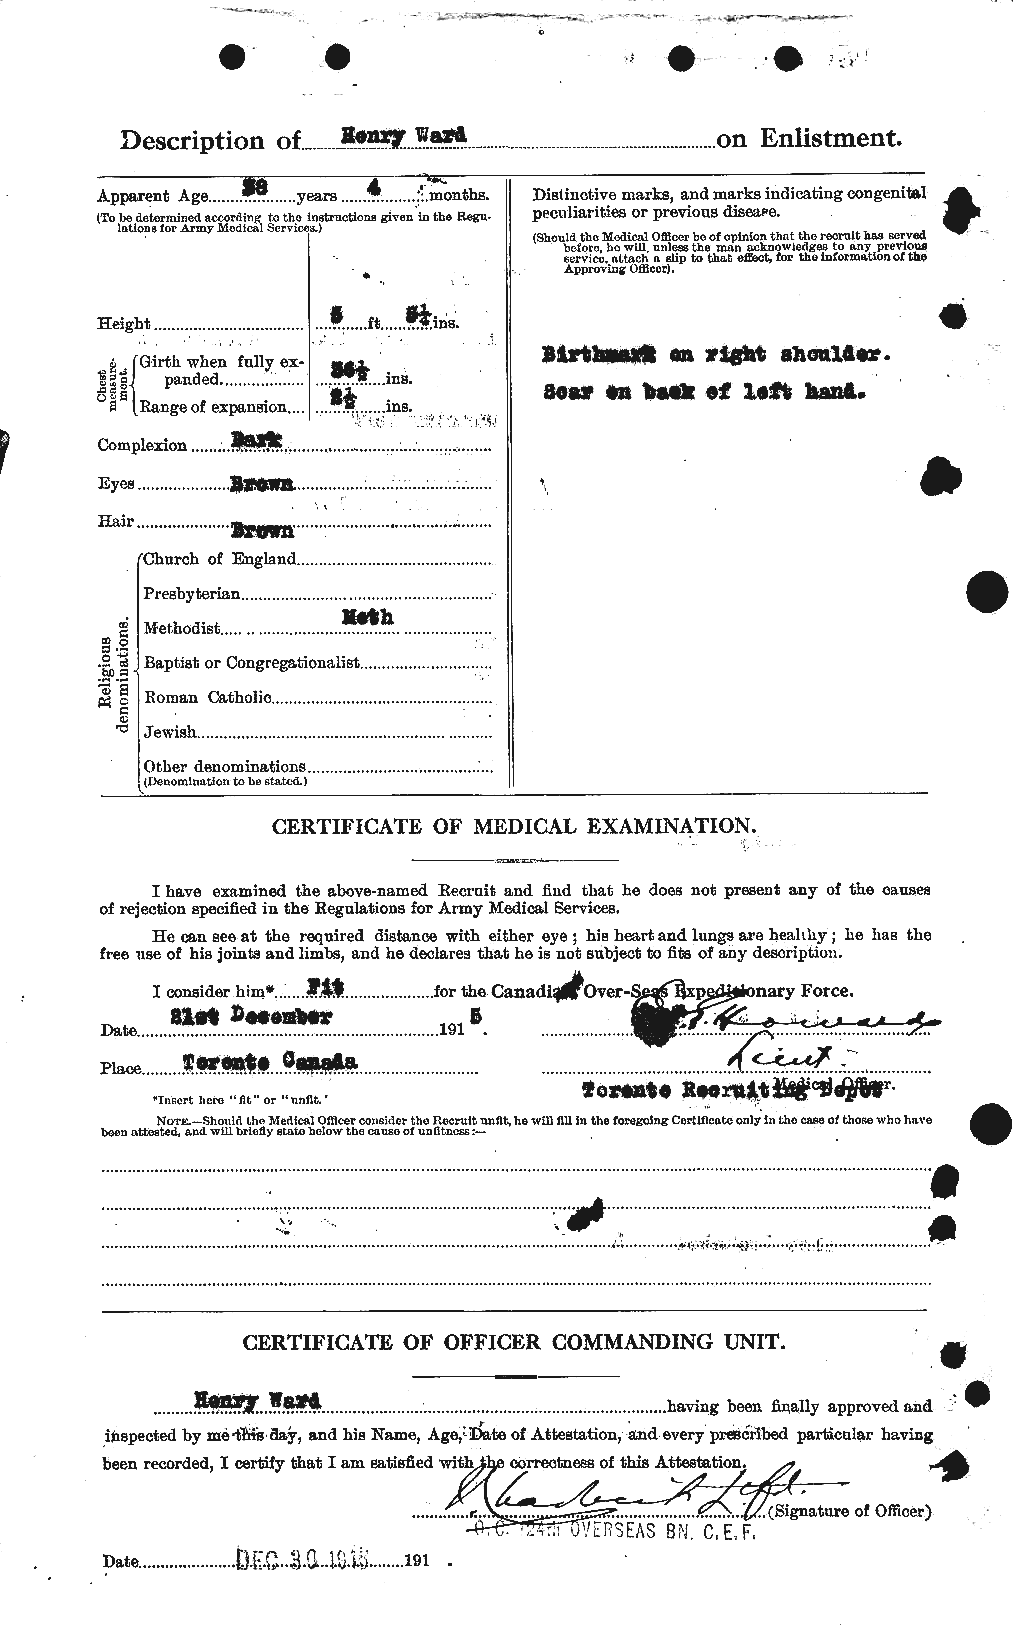 Personnel Records of the First World War - CEF 657820b